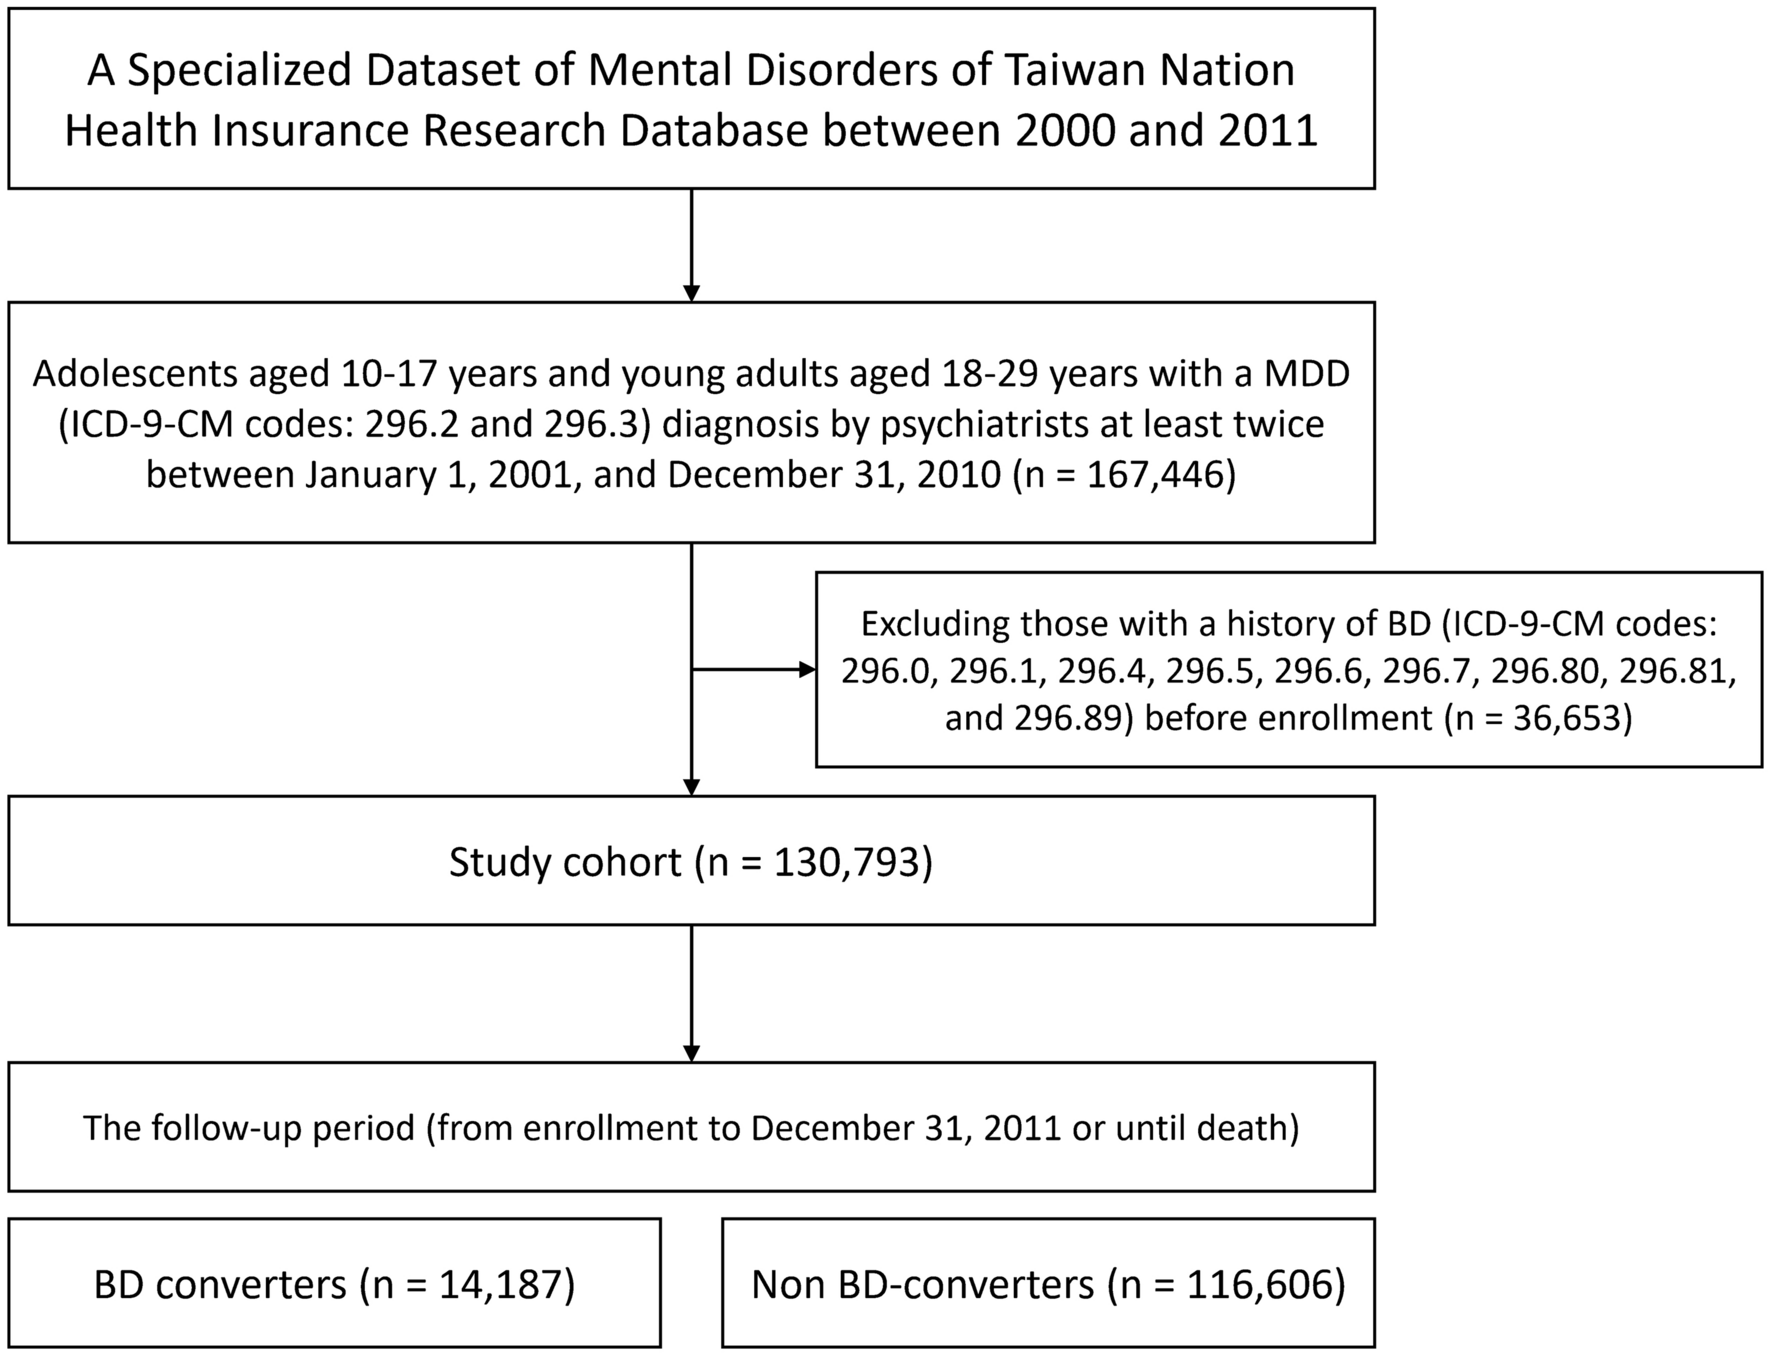 Diagnostic conversion to bipolar disorder among adolescents and young adults with major depressive disorder: a nationwide longitudinal study